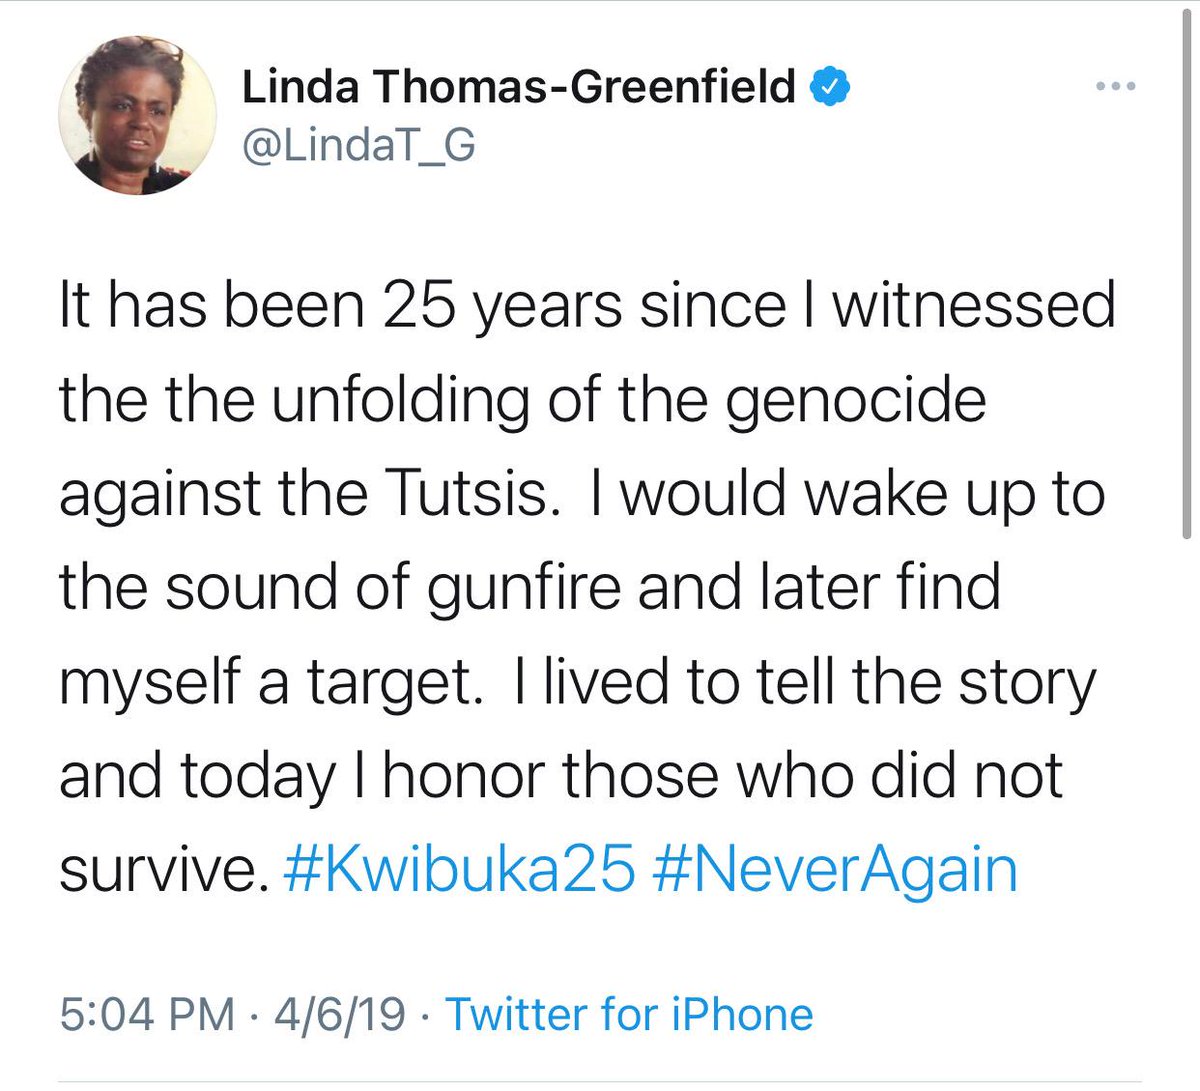 #Kwibuka30 ... 5 years ago she had 'lived to tell the story and to honor those who did not survive.' from her 'witnessing the unfolding of the genocide against the Tutsi.' ... what happened since?